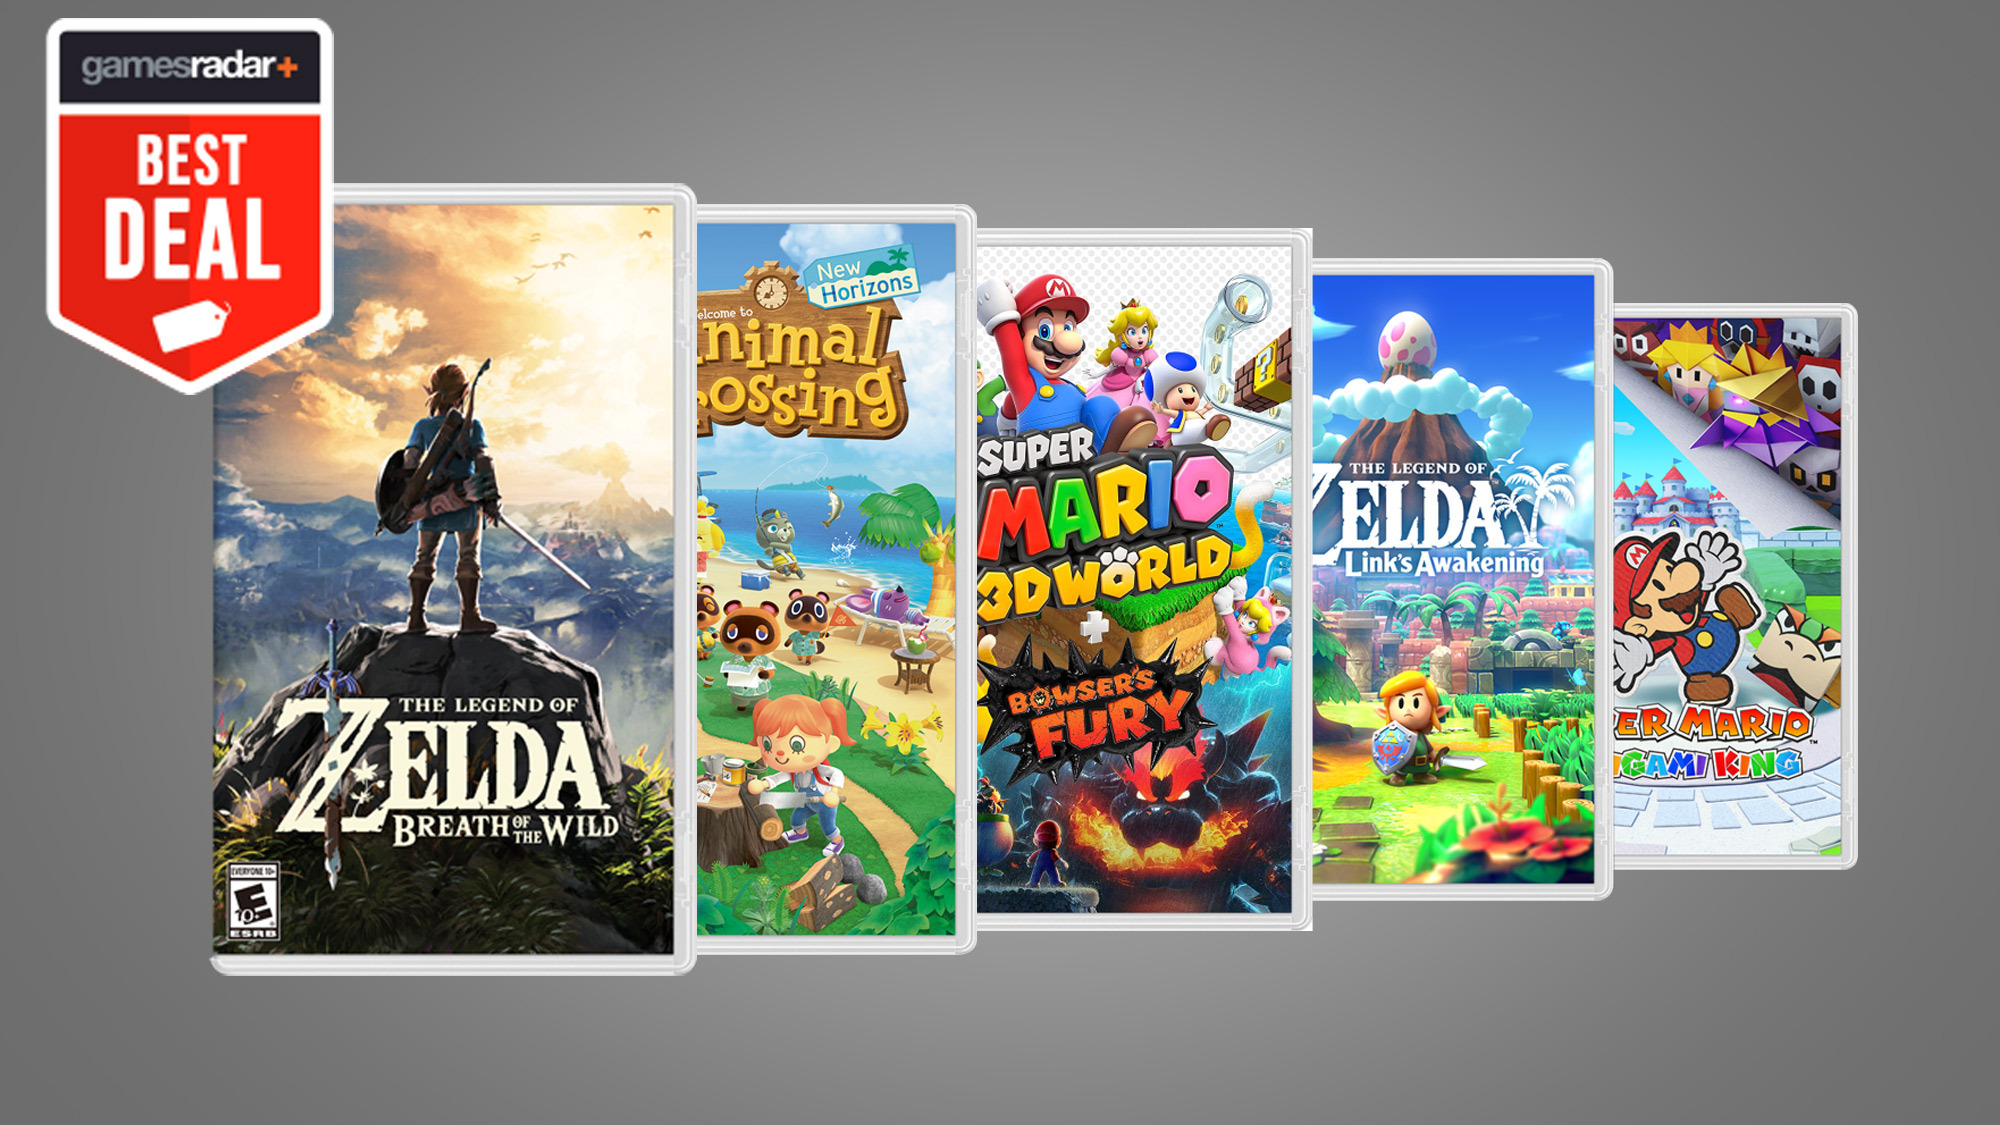 All the best Nintendo Switch games still on sale from Cyber Monday